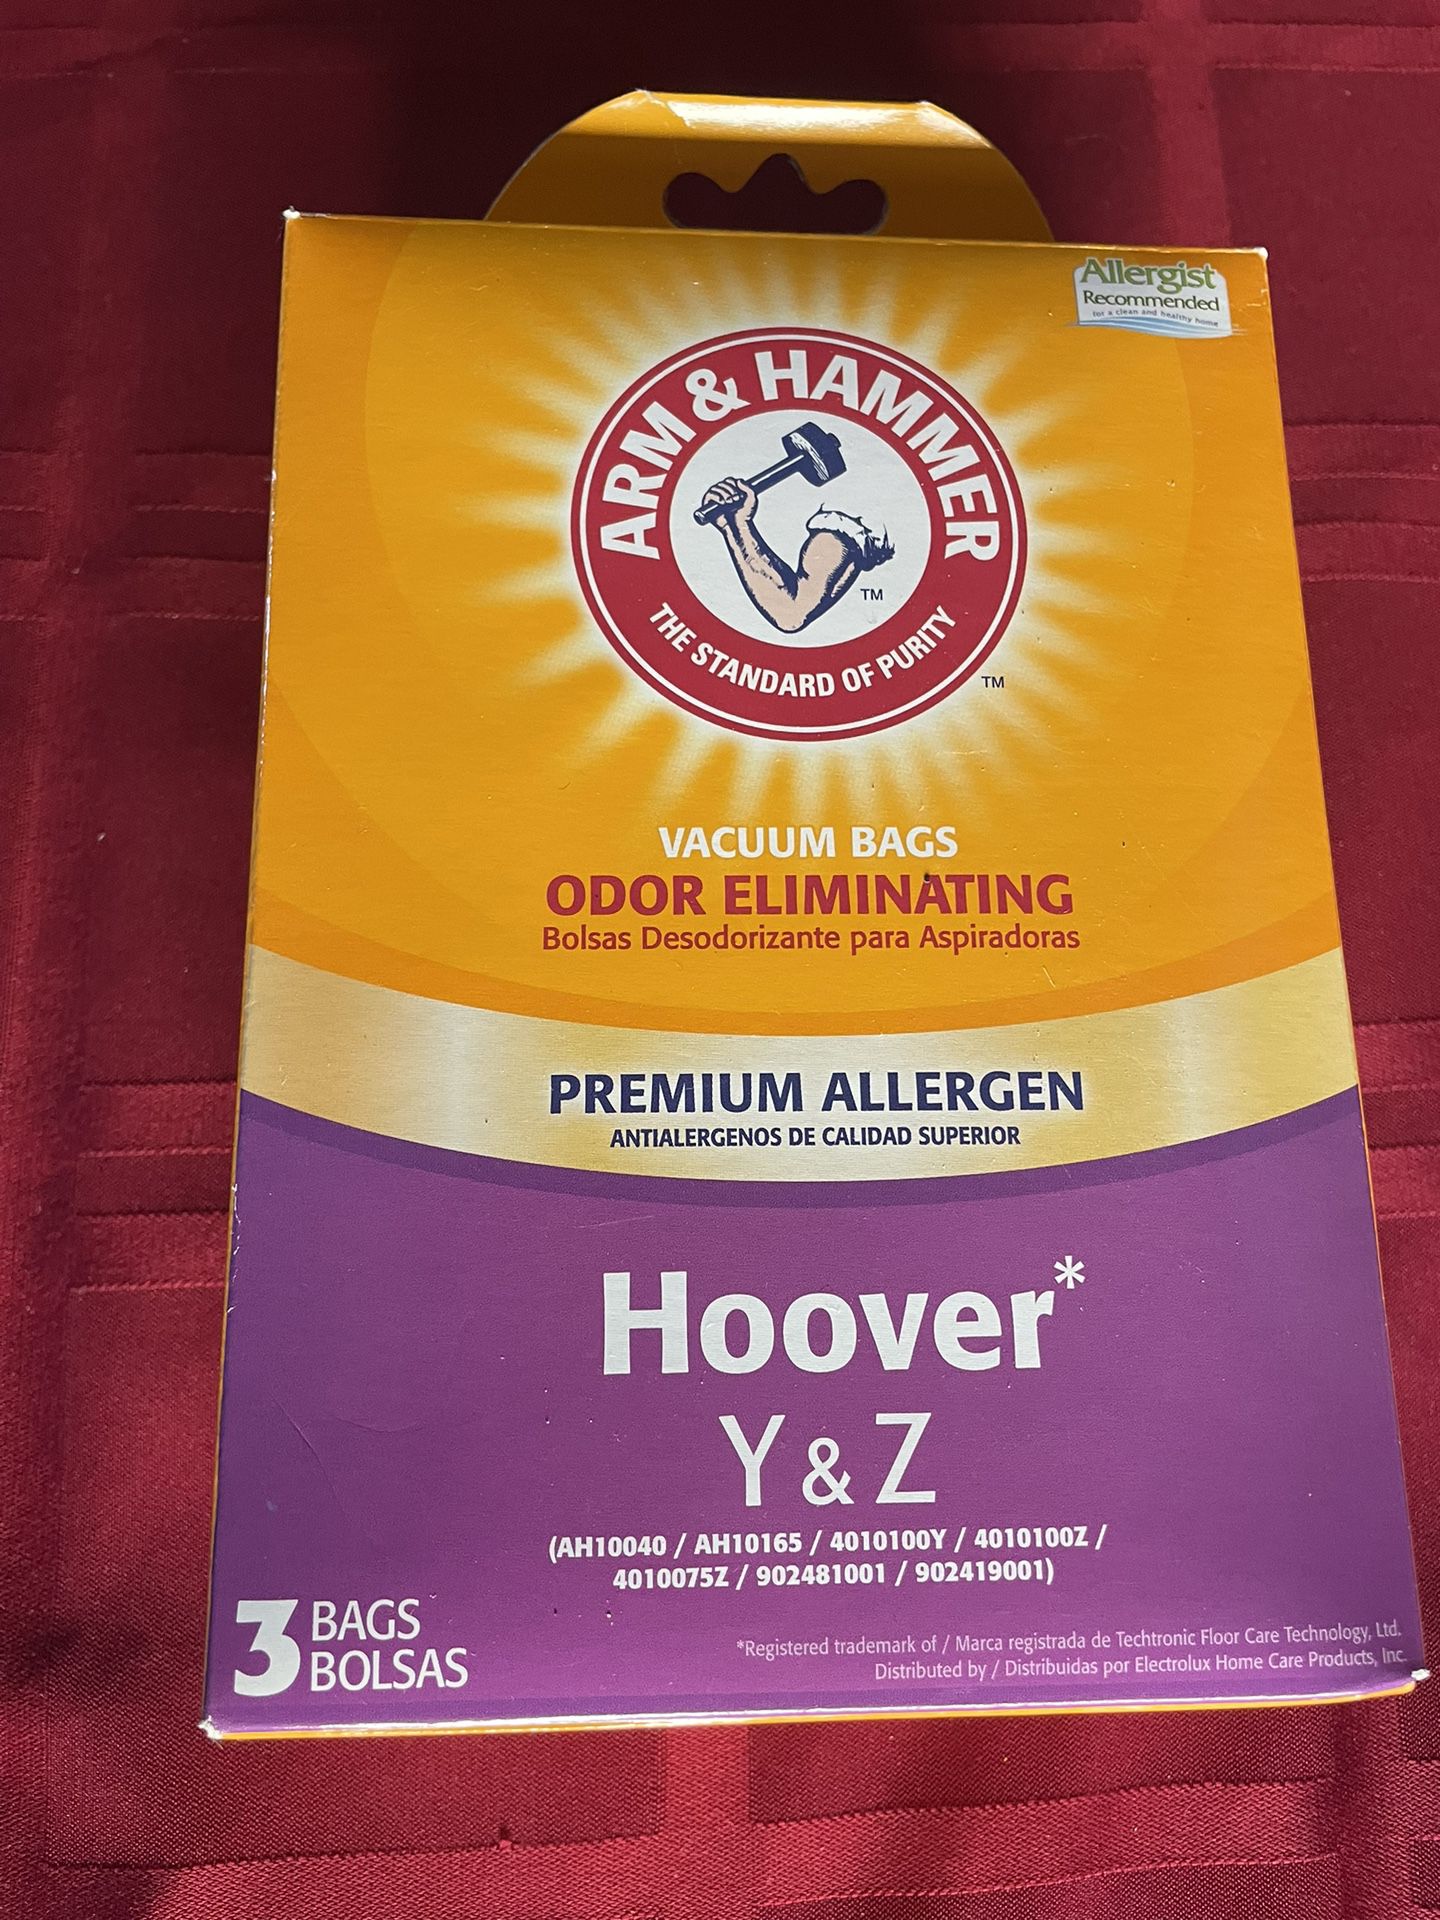 Arm and Hammer Hoover Vacuum Bags